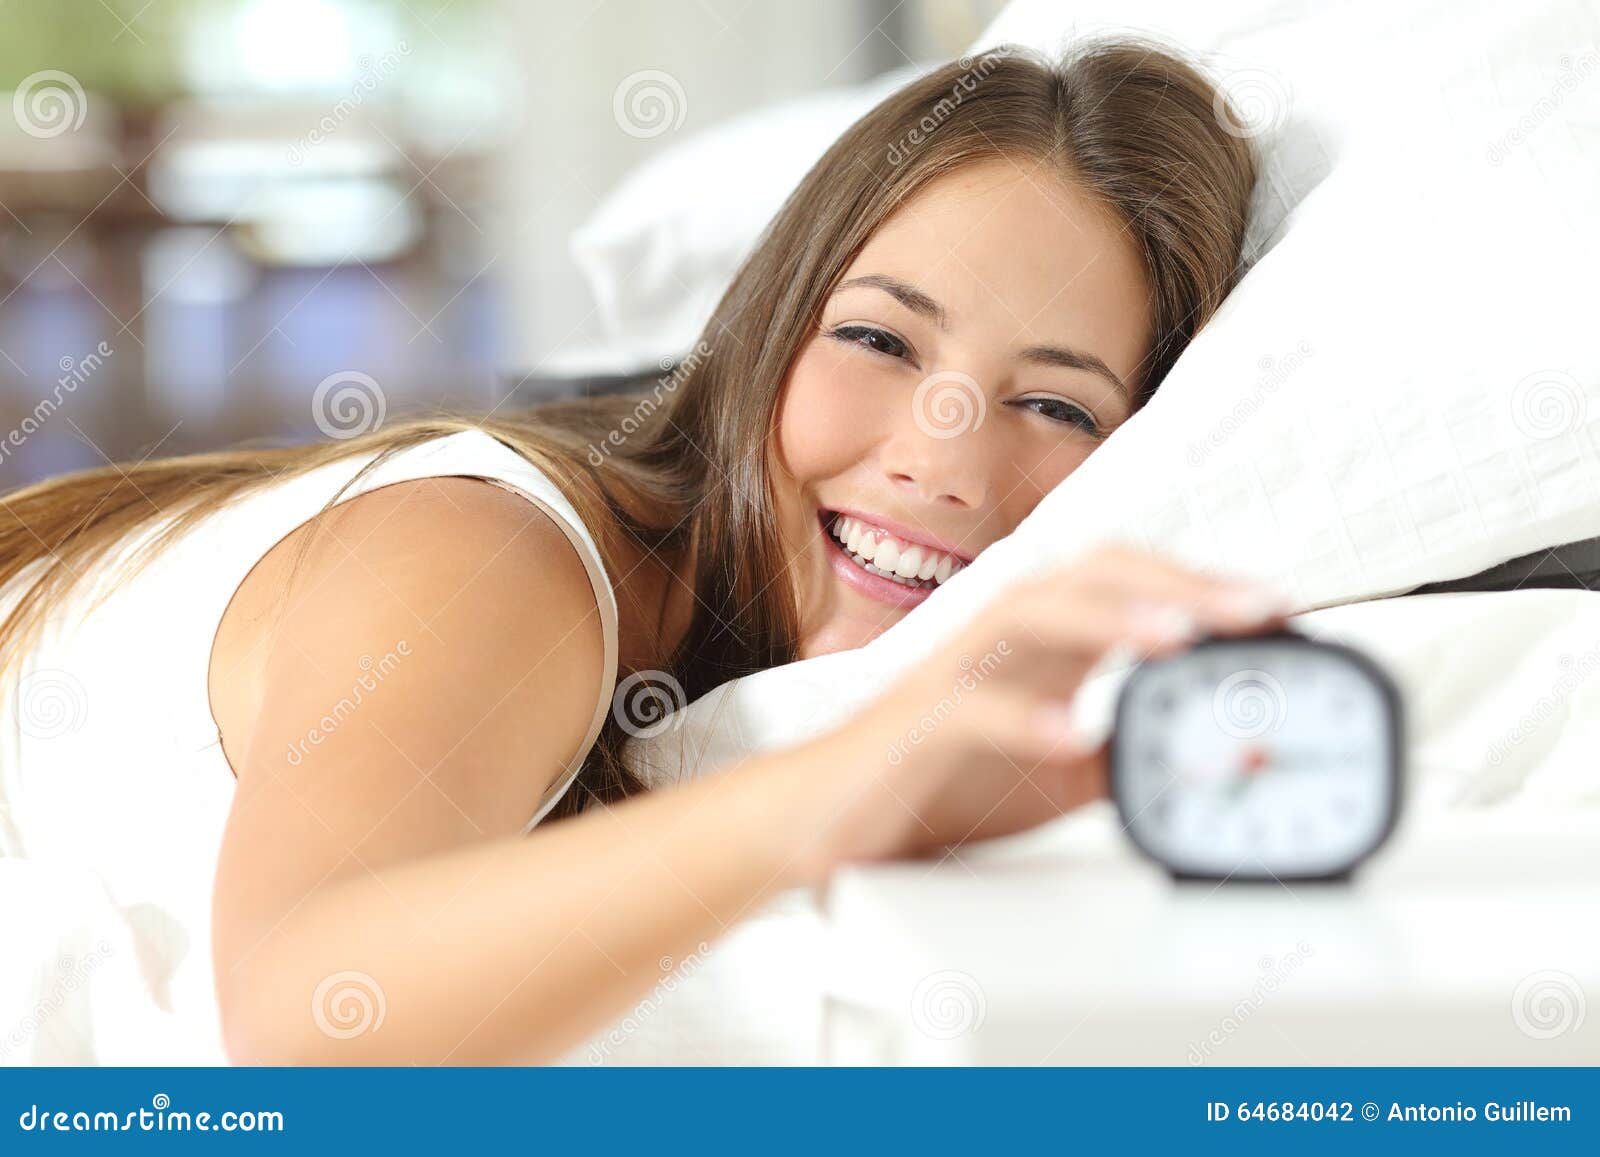 happy woman waking up having a good day